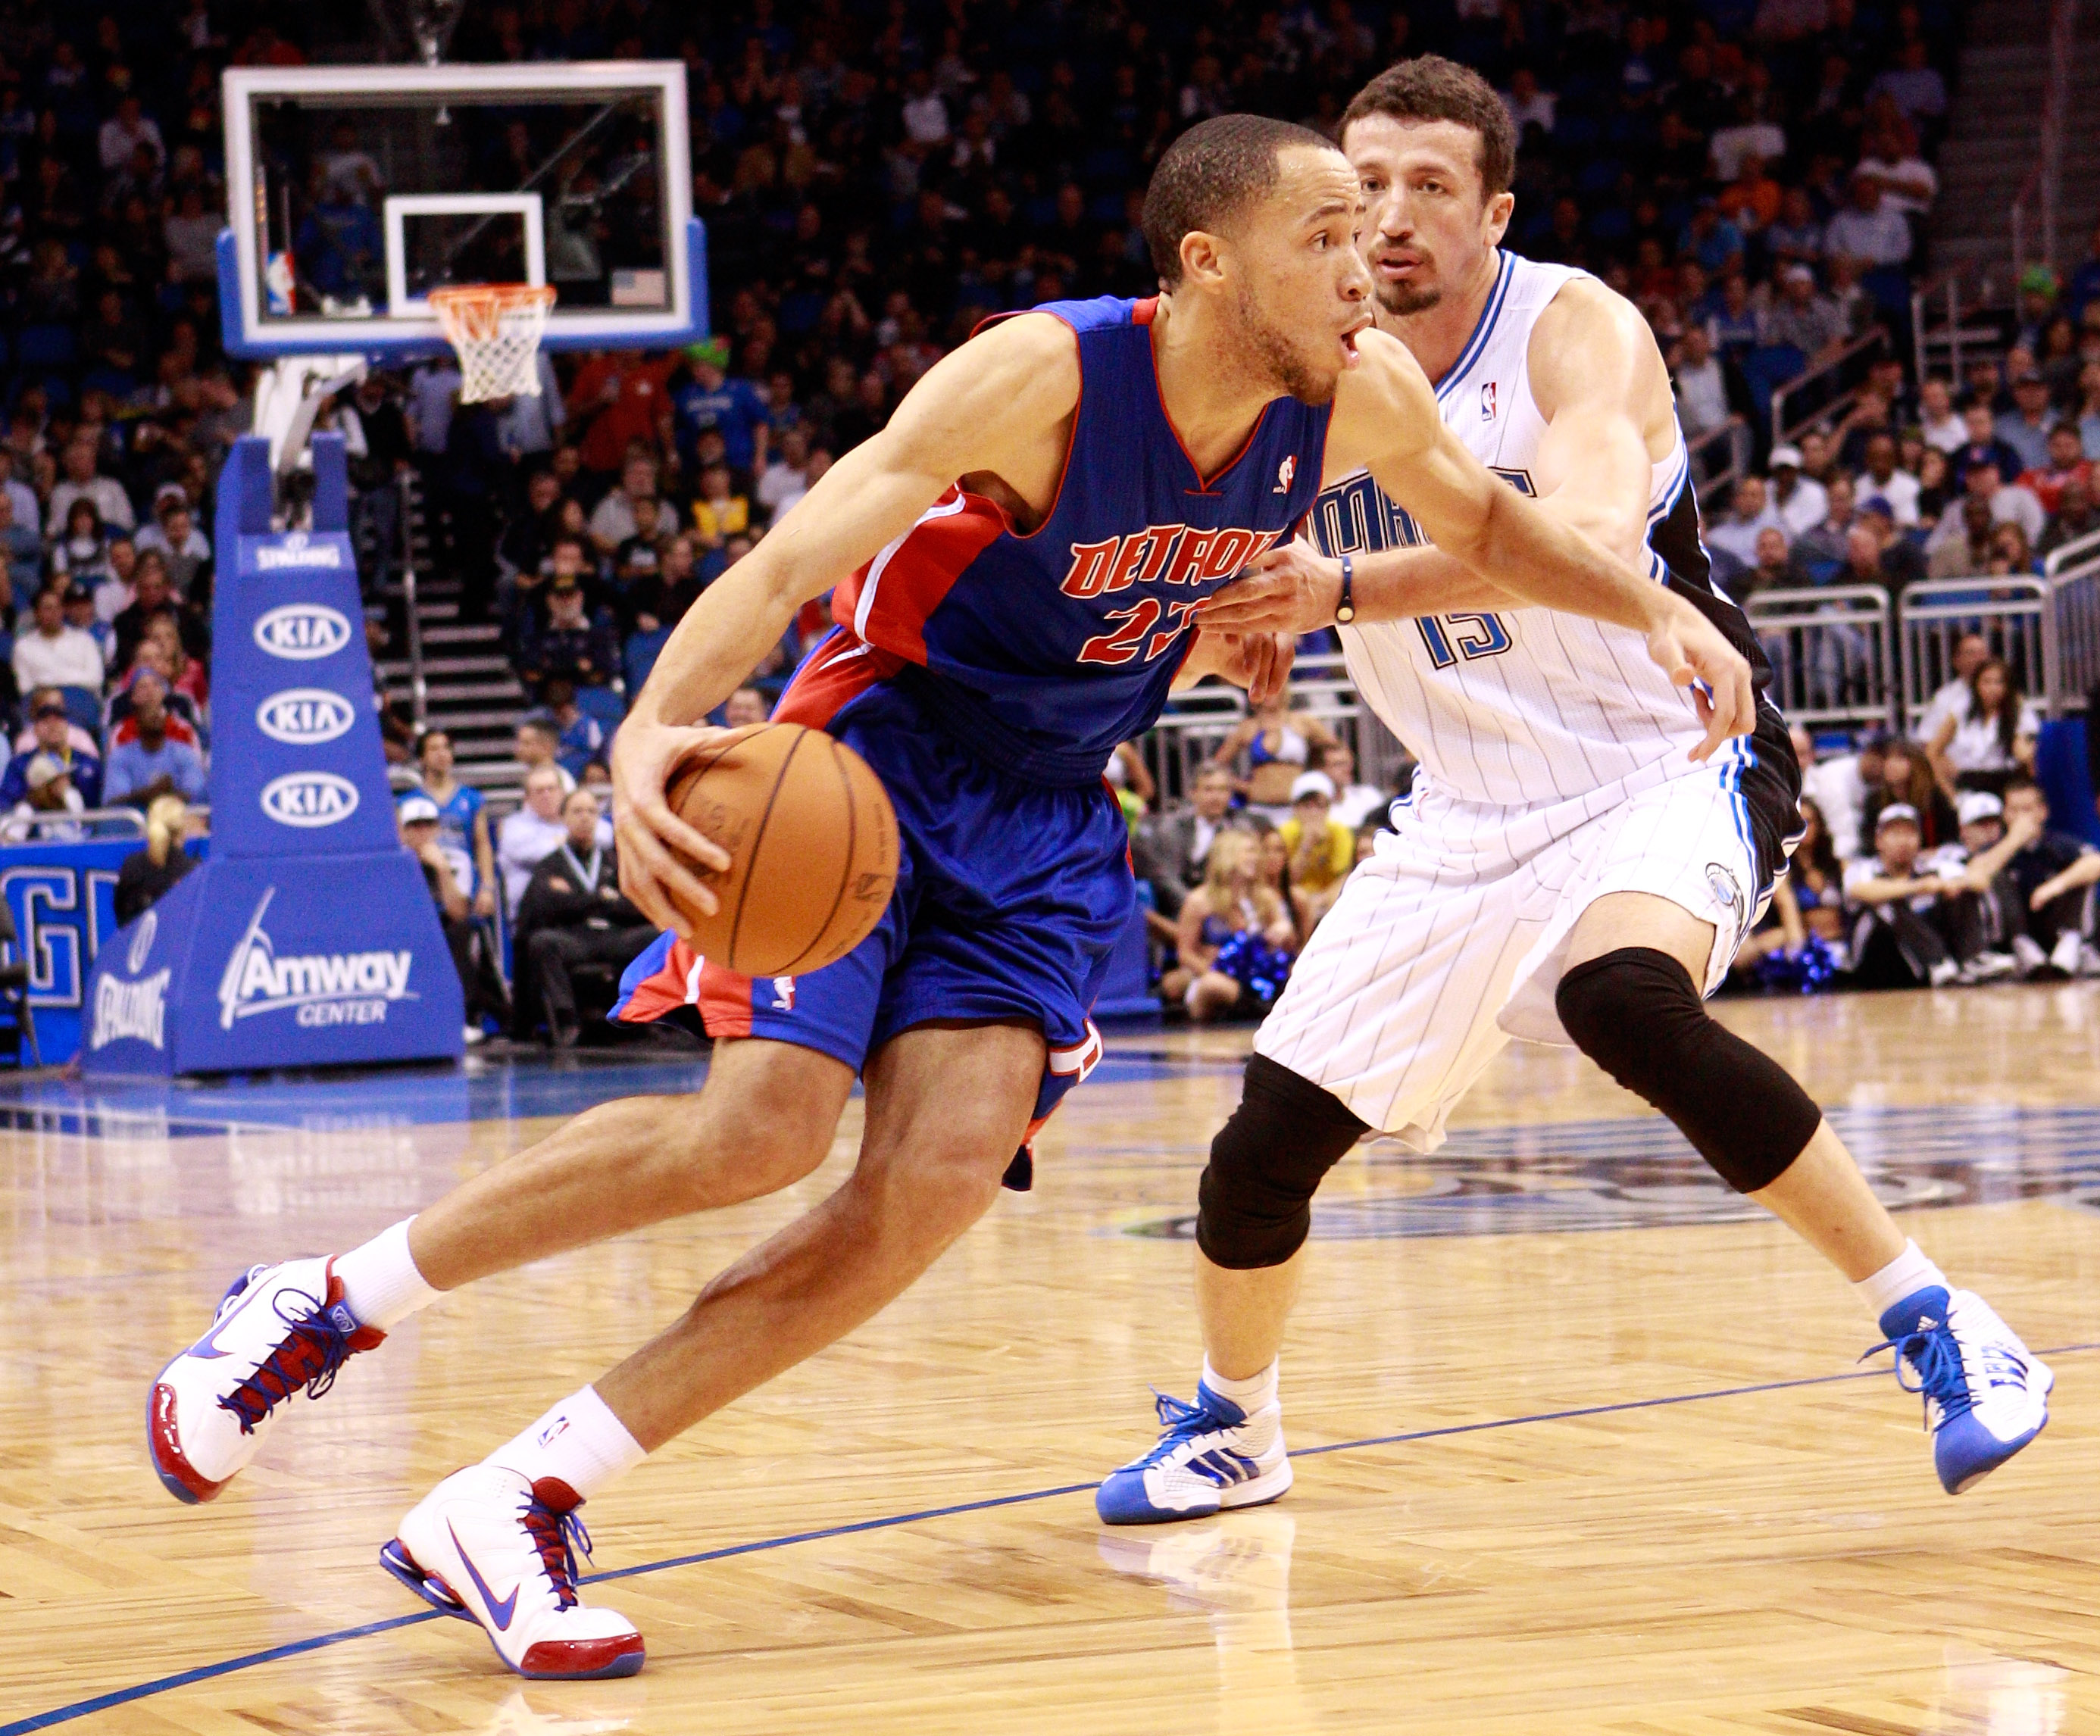 ORLANDO, FL - JANUARY 24:  Tayshaun Prince #22 of the Detroit Pistons drives against Hedo Turkoglu #15 of the Orlando Magic during the game at Amway Arena on January 24, 2011 in Orlando, Florida.  NOTE TO USER: User expressly acknowledges and agrees that,